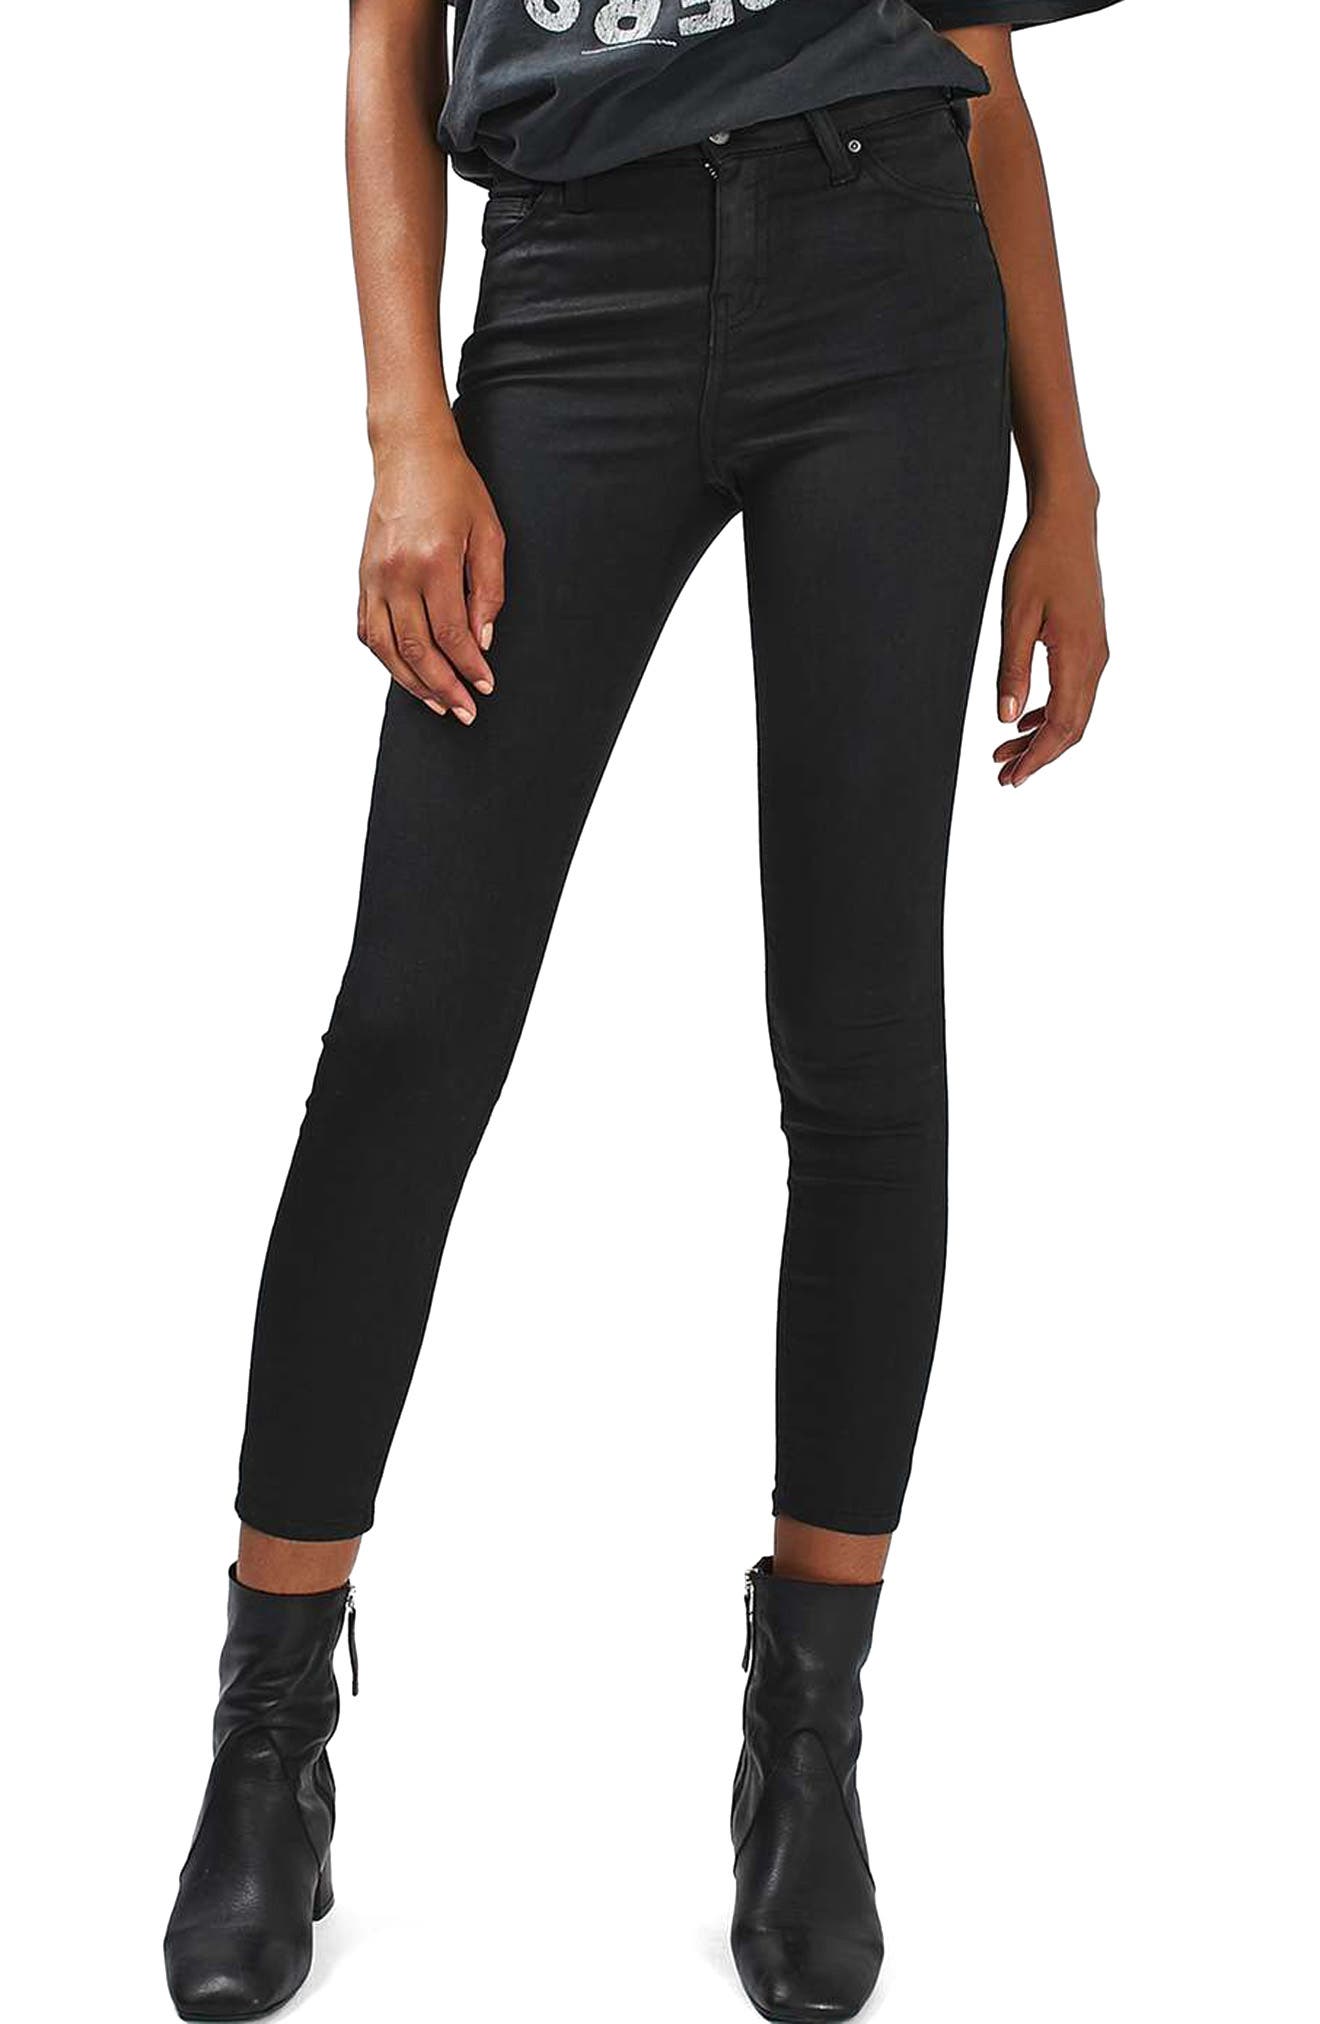 topshop wax coated jeans